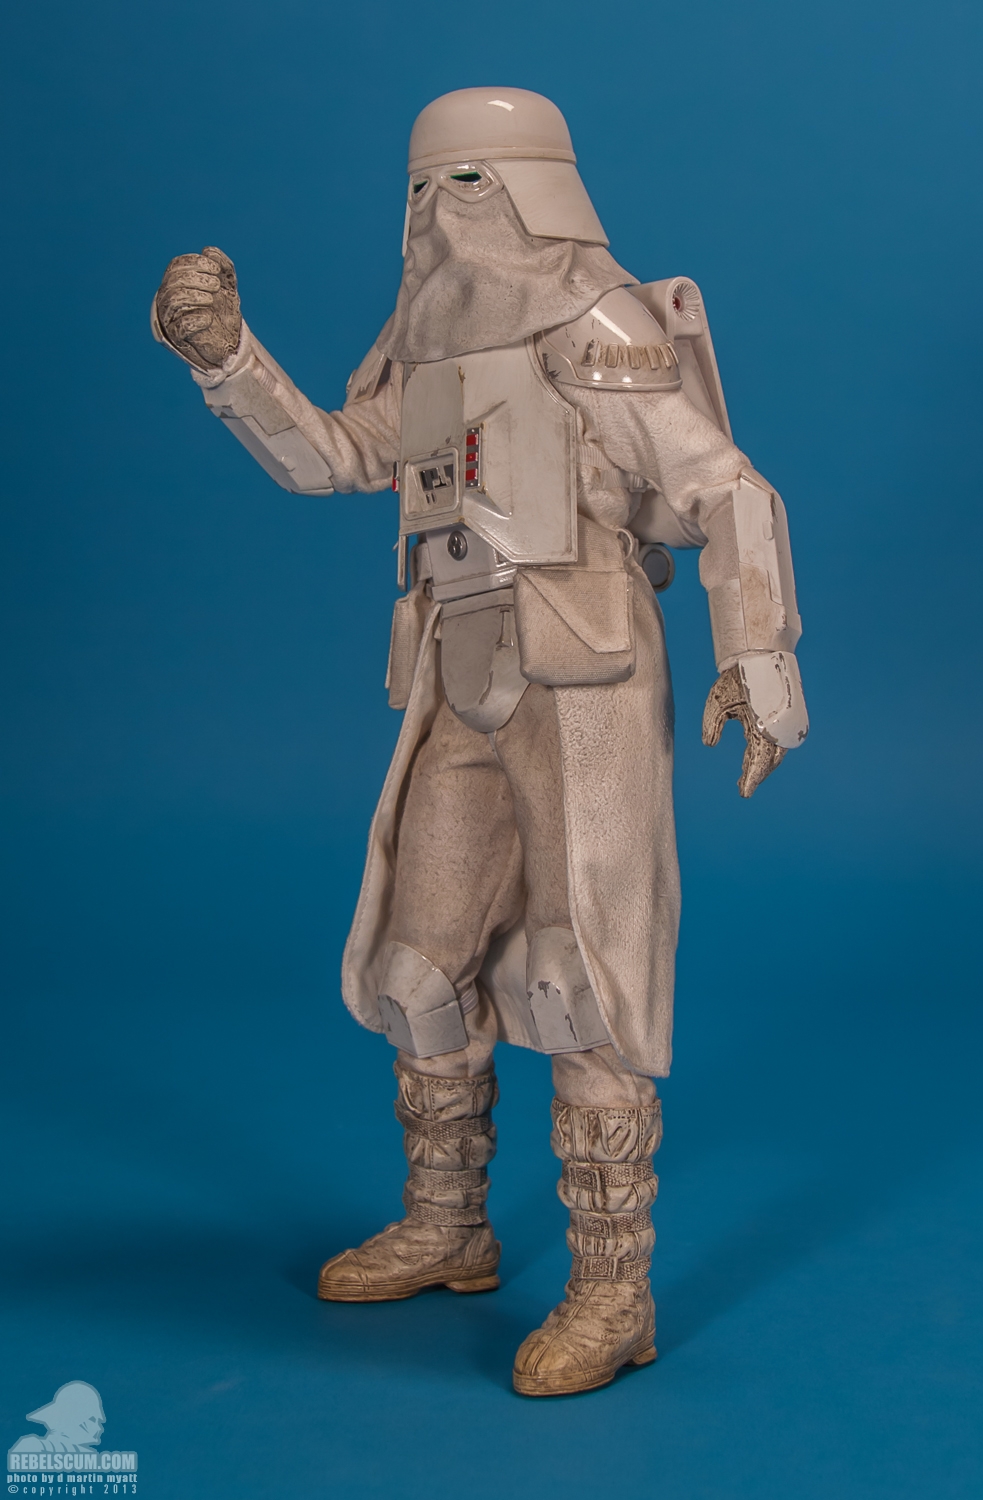 Snowtrooper_Militaries_Of_Star_Wars_Sideshow_Collectibles-03.jpg